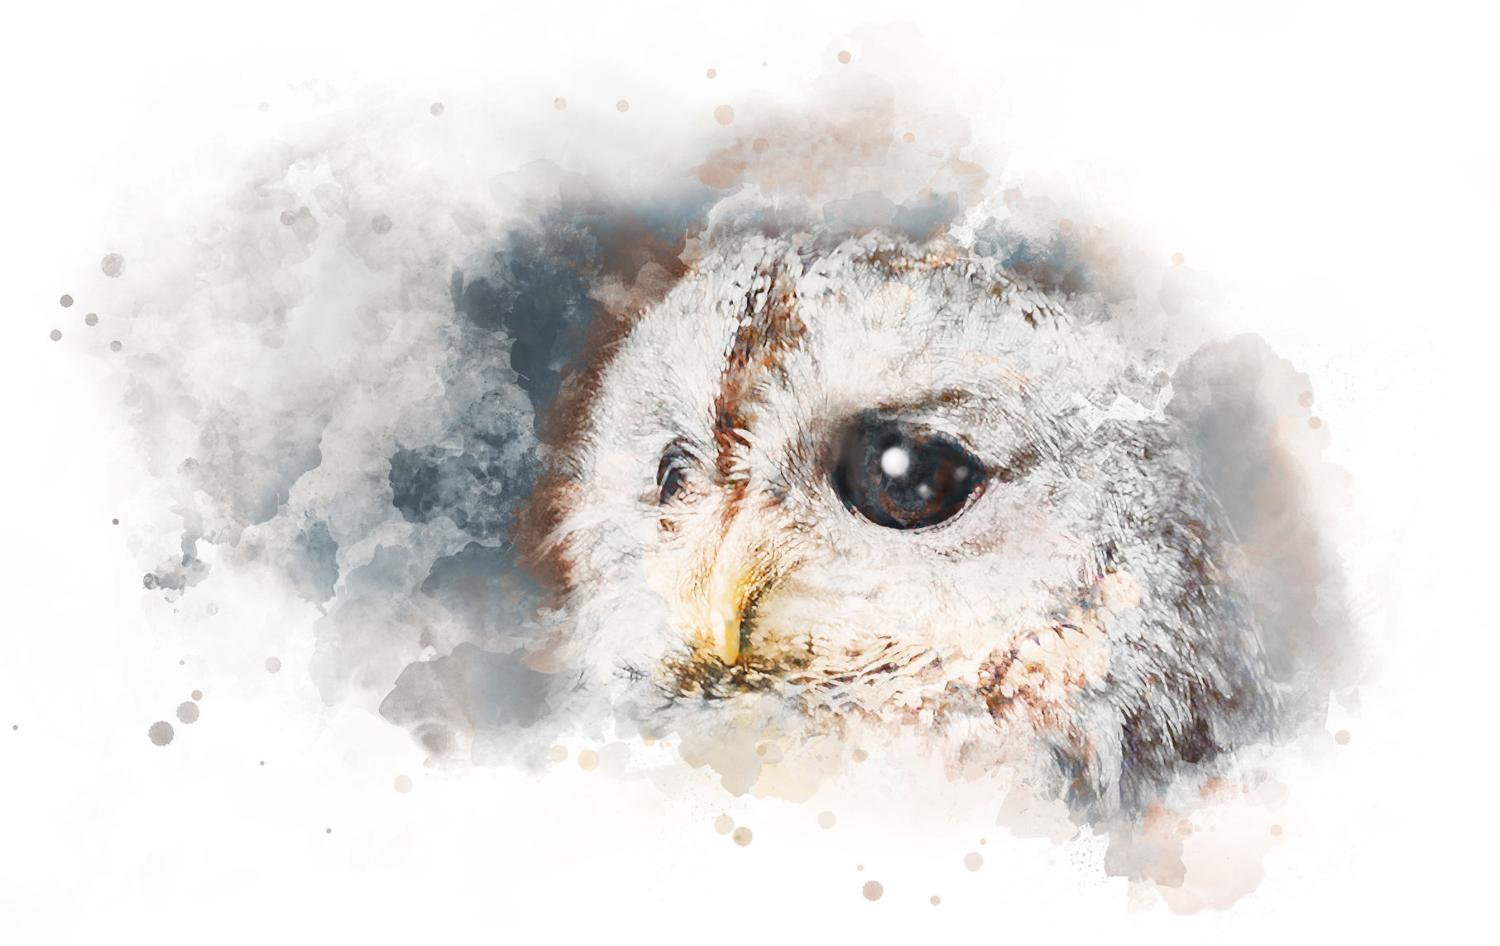 OWL’S EYE: What does success look like? | Lifestyles